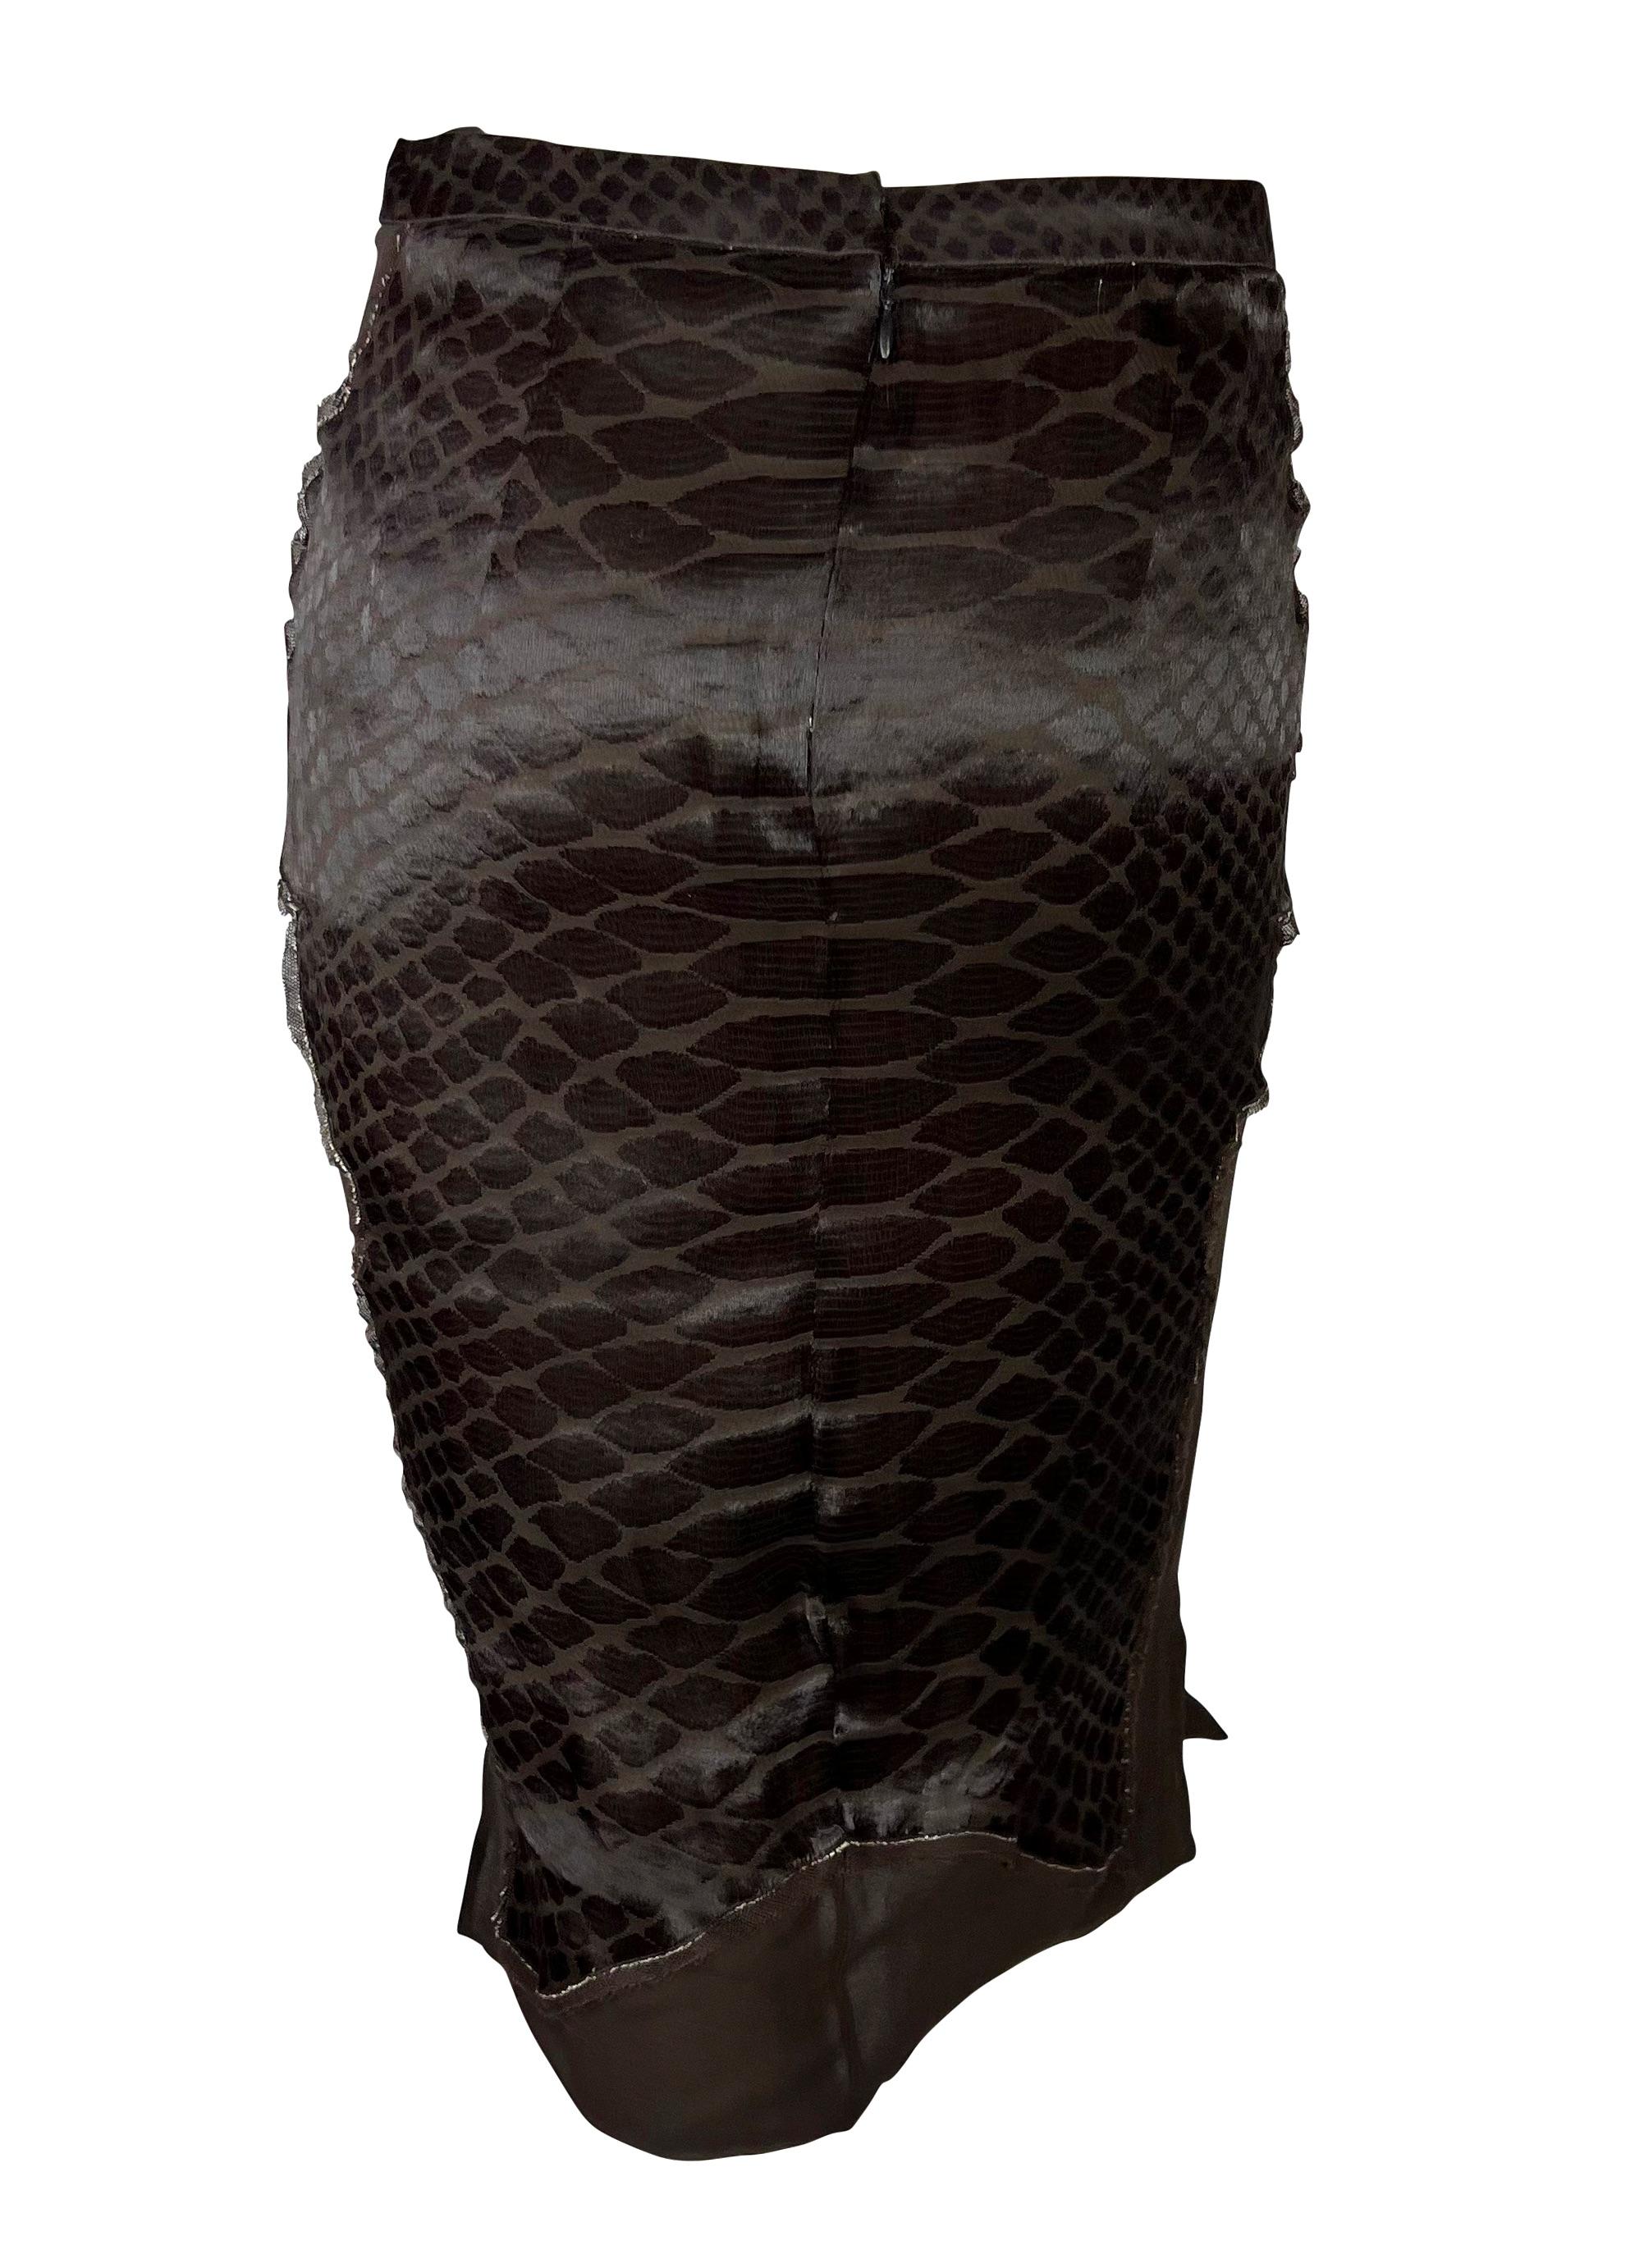 F/W 2004 Yves Saint Laurent by Tom Ford Sheer Brown Scale Chinoiserie Skirt For Sale 2